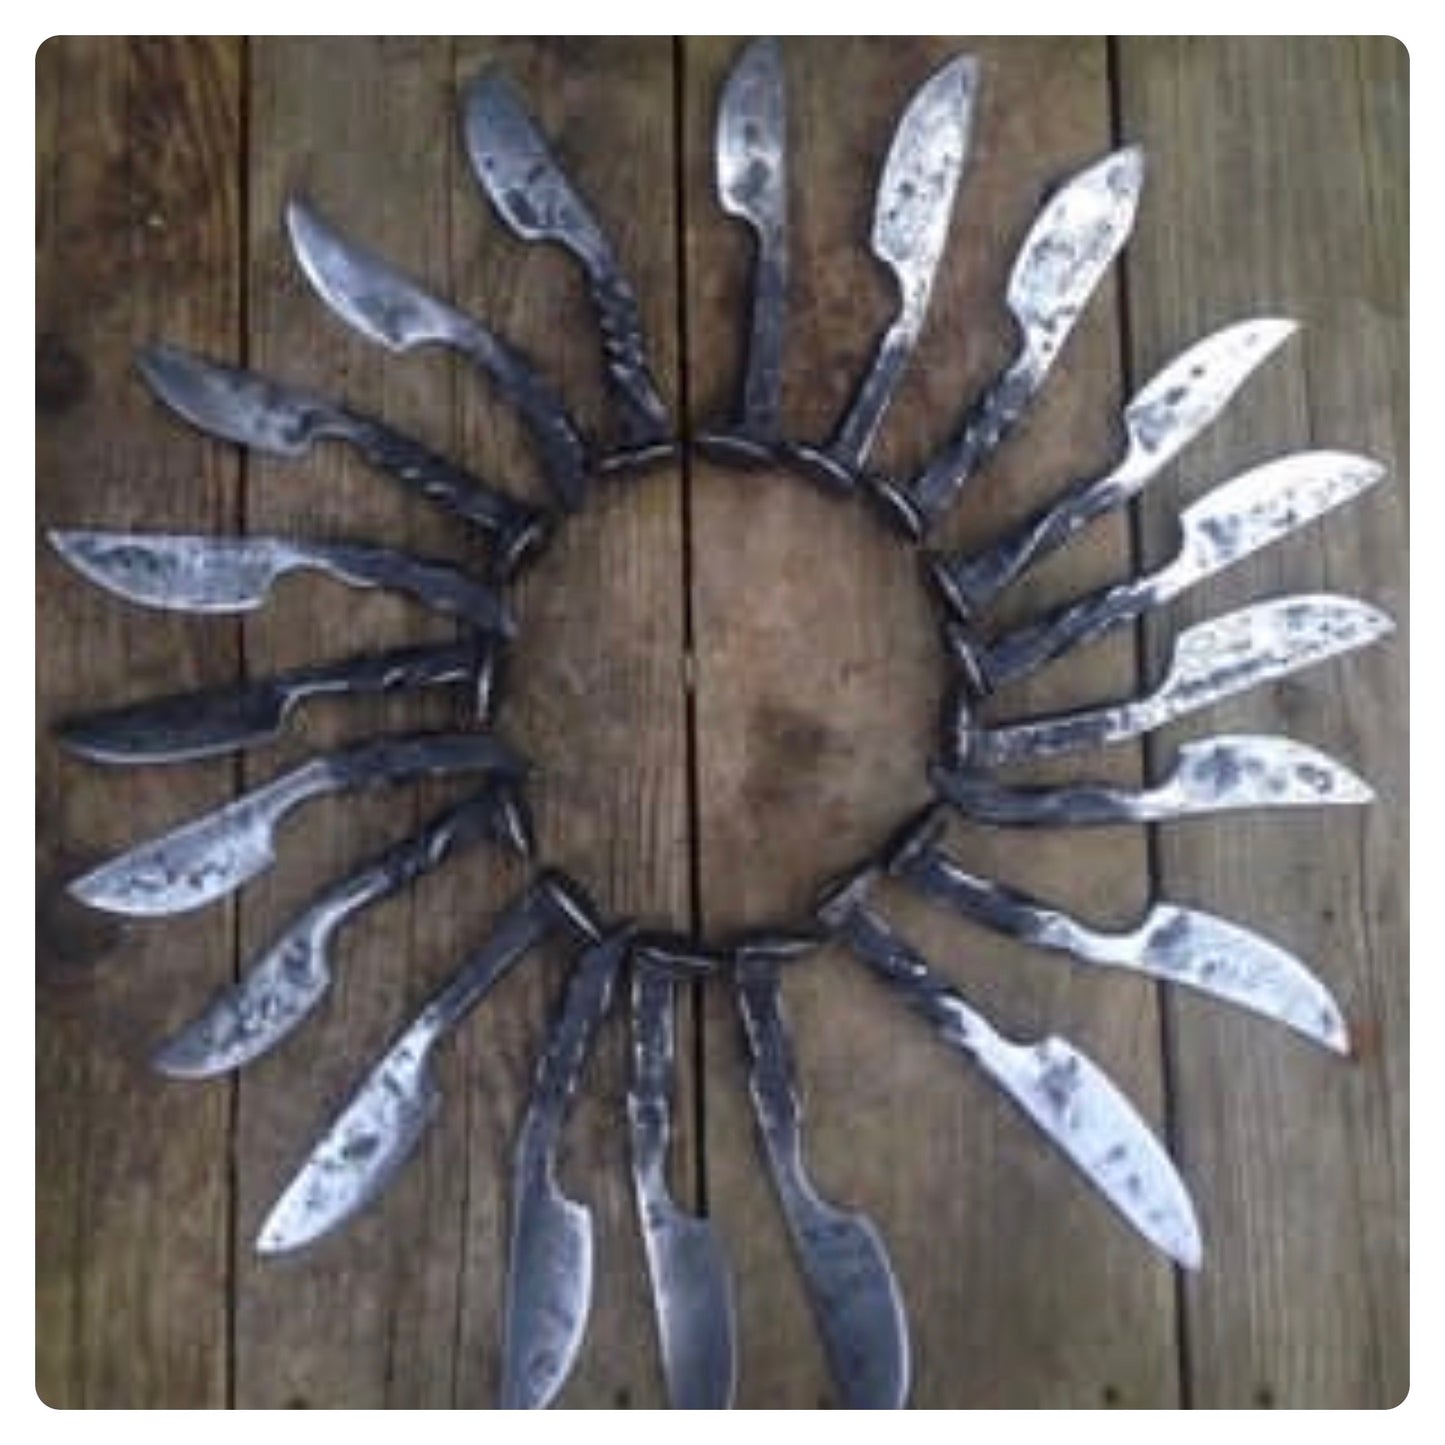 Parent/Teen Knife Making Class Saturday May 4th 12-5